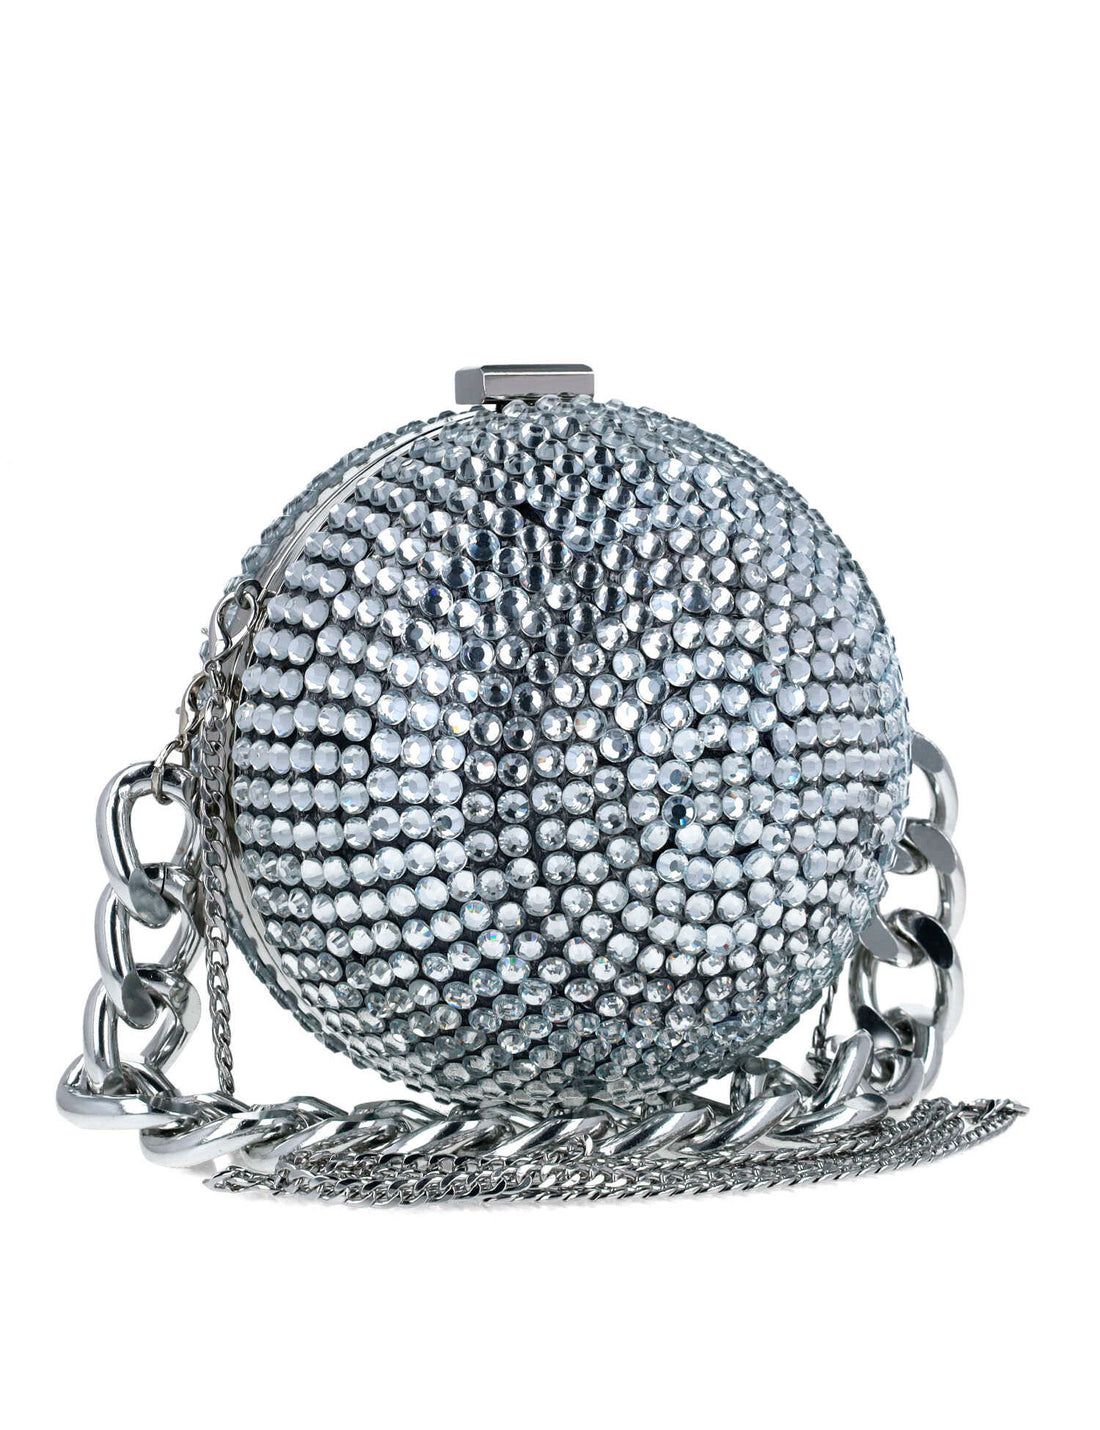 Round Clutch With Over Embellishment And Chain Strap_85670_01_02